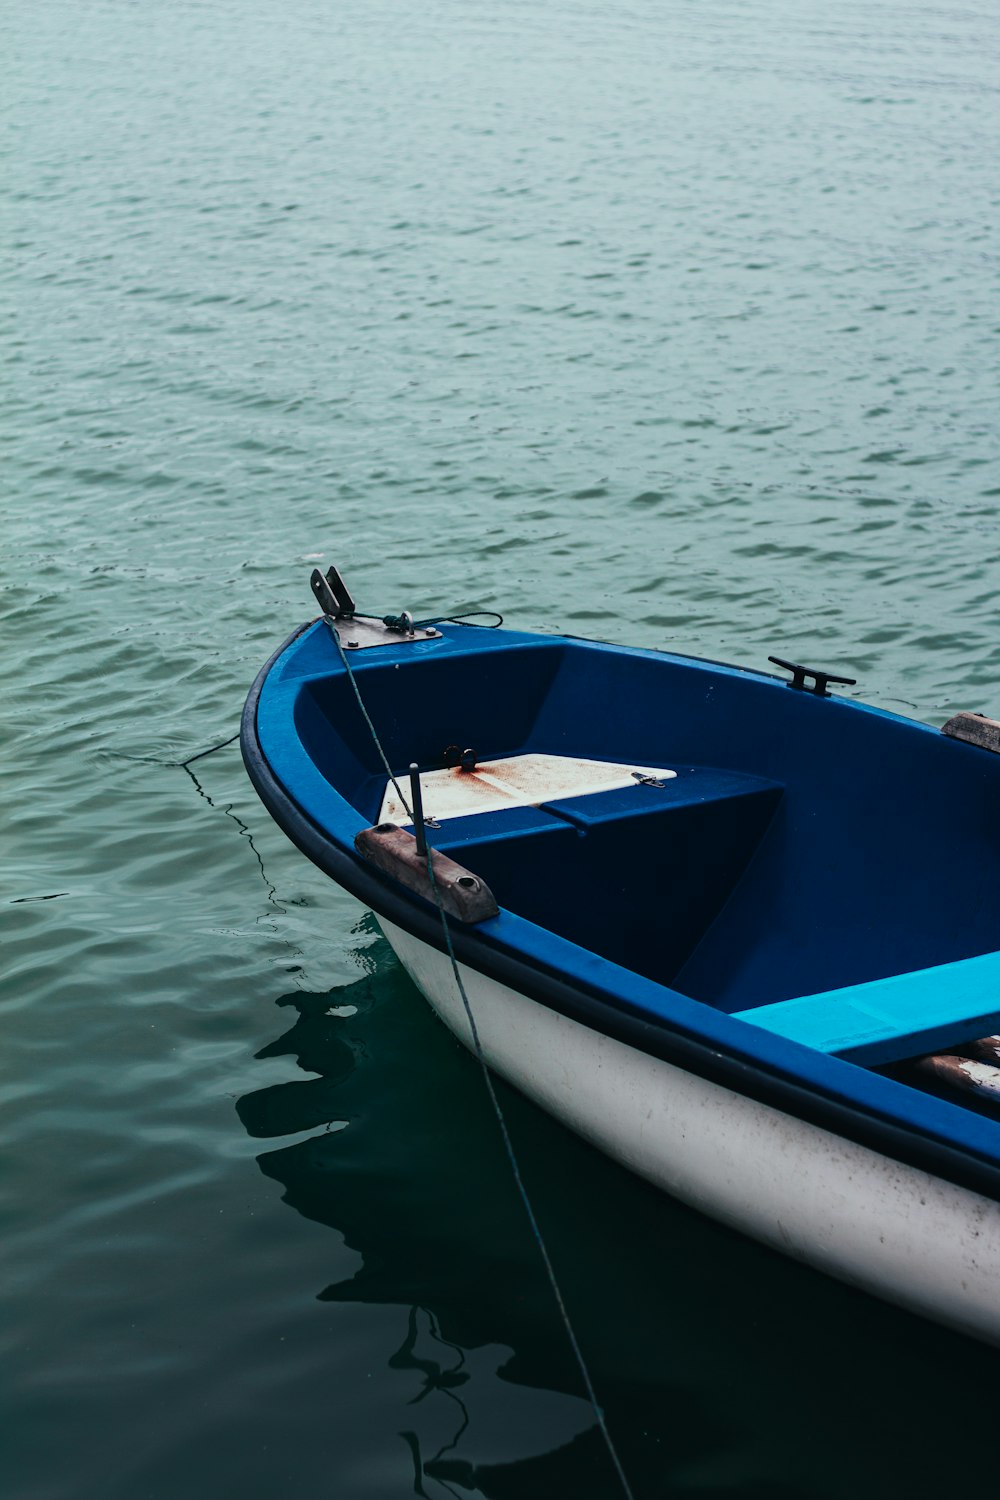 blue and white boat on water during daytime